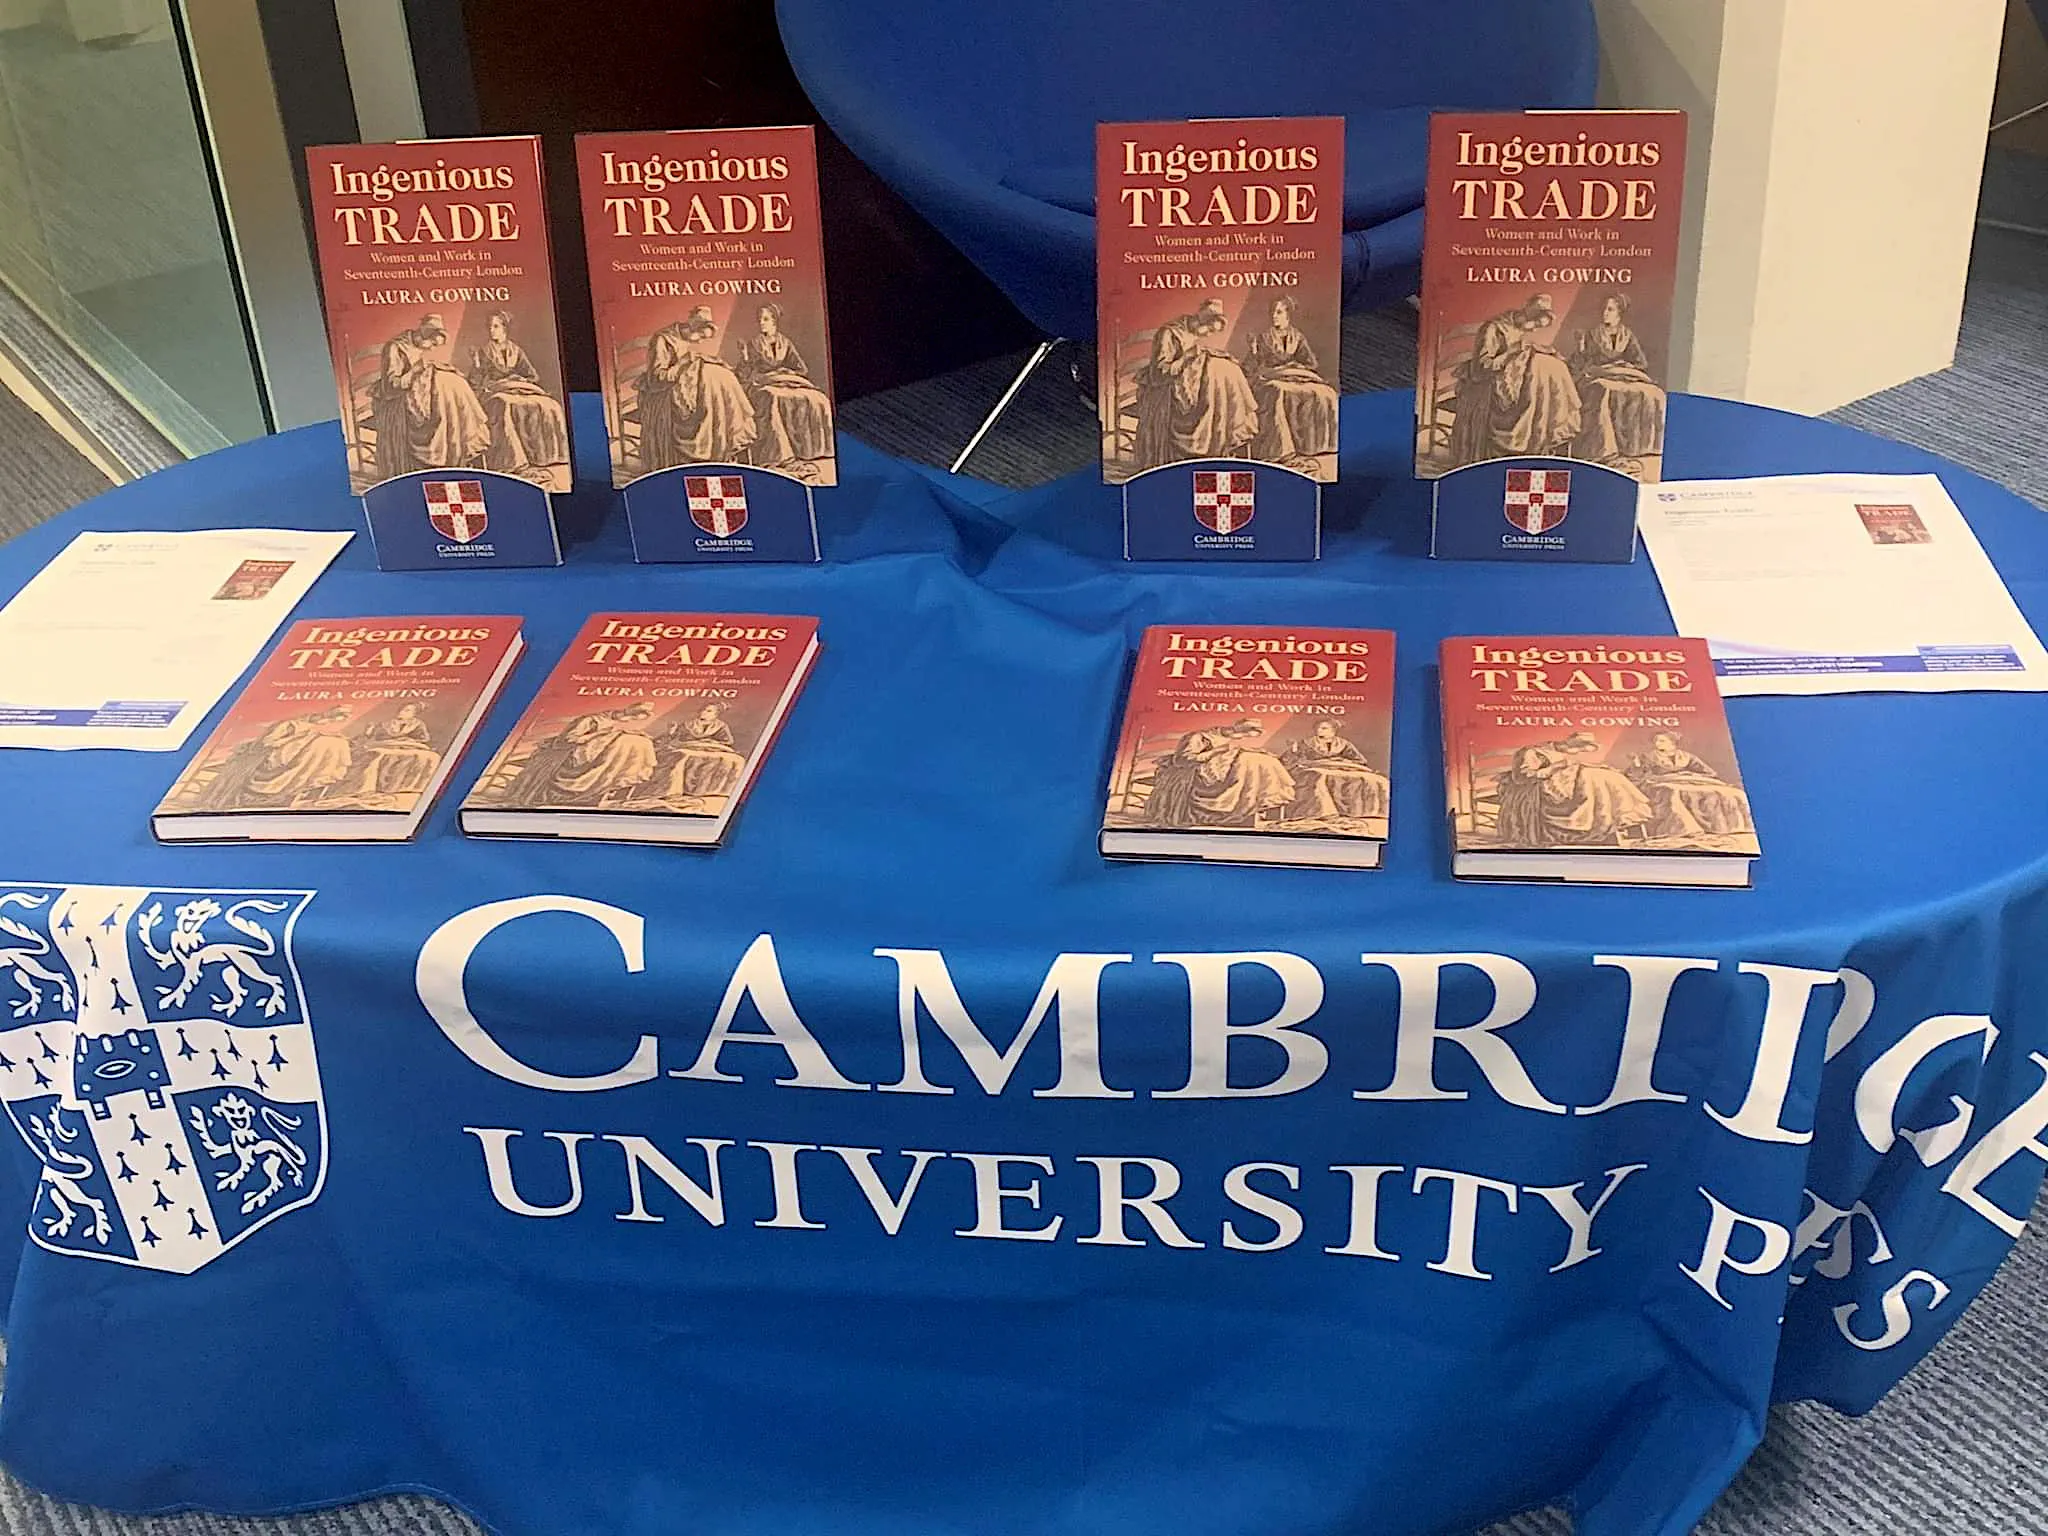 Ingenious Trade book launch at King's College London, November 2022. Image credit: Facebook / Cambridge University Press - History, Classics and Archaeology